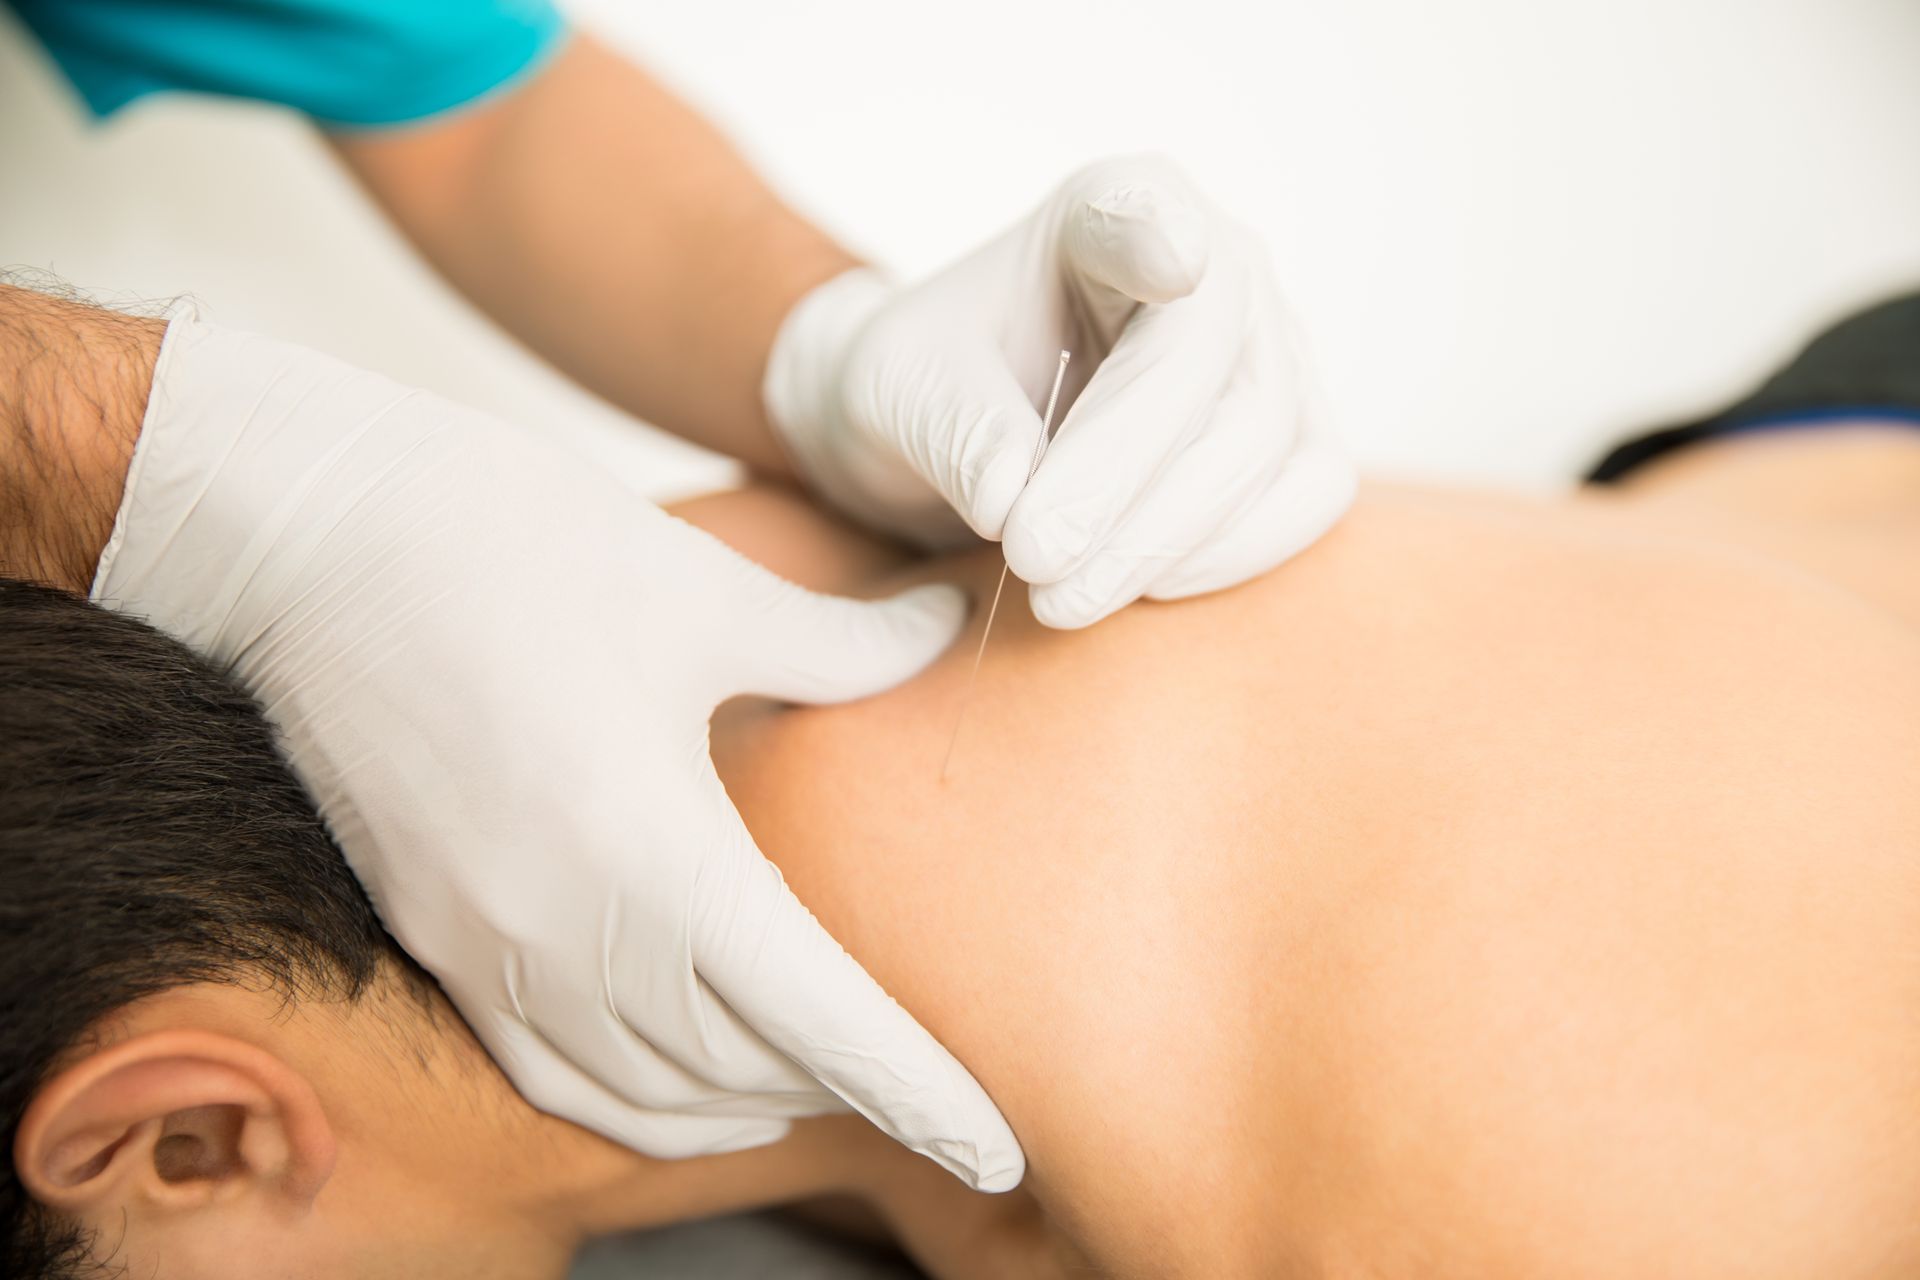 dry needling services near me